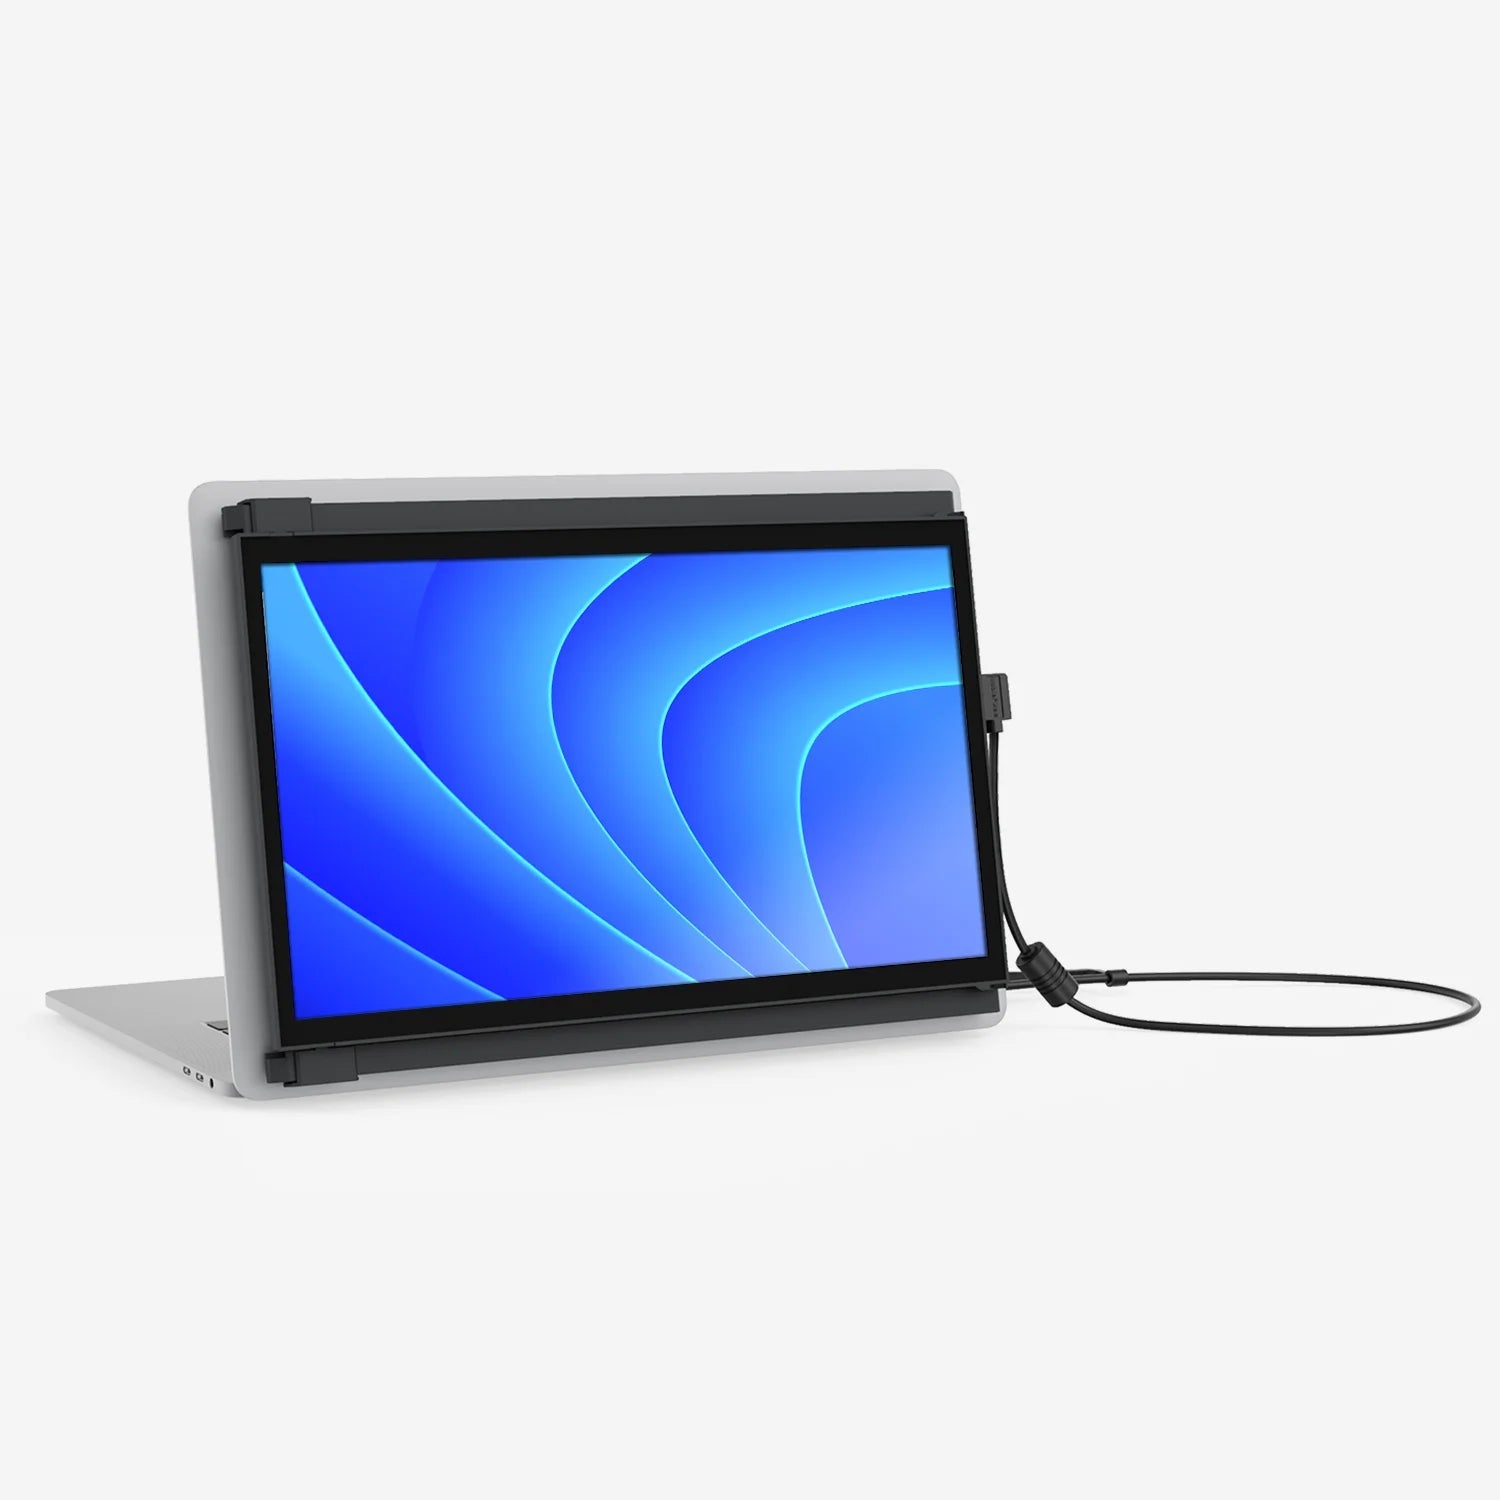 Duex Plus portable Second Screen for Laptop